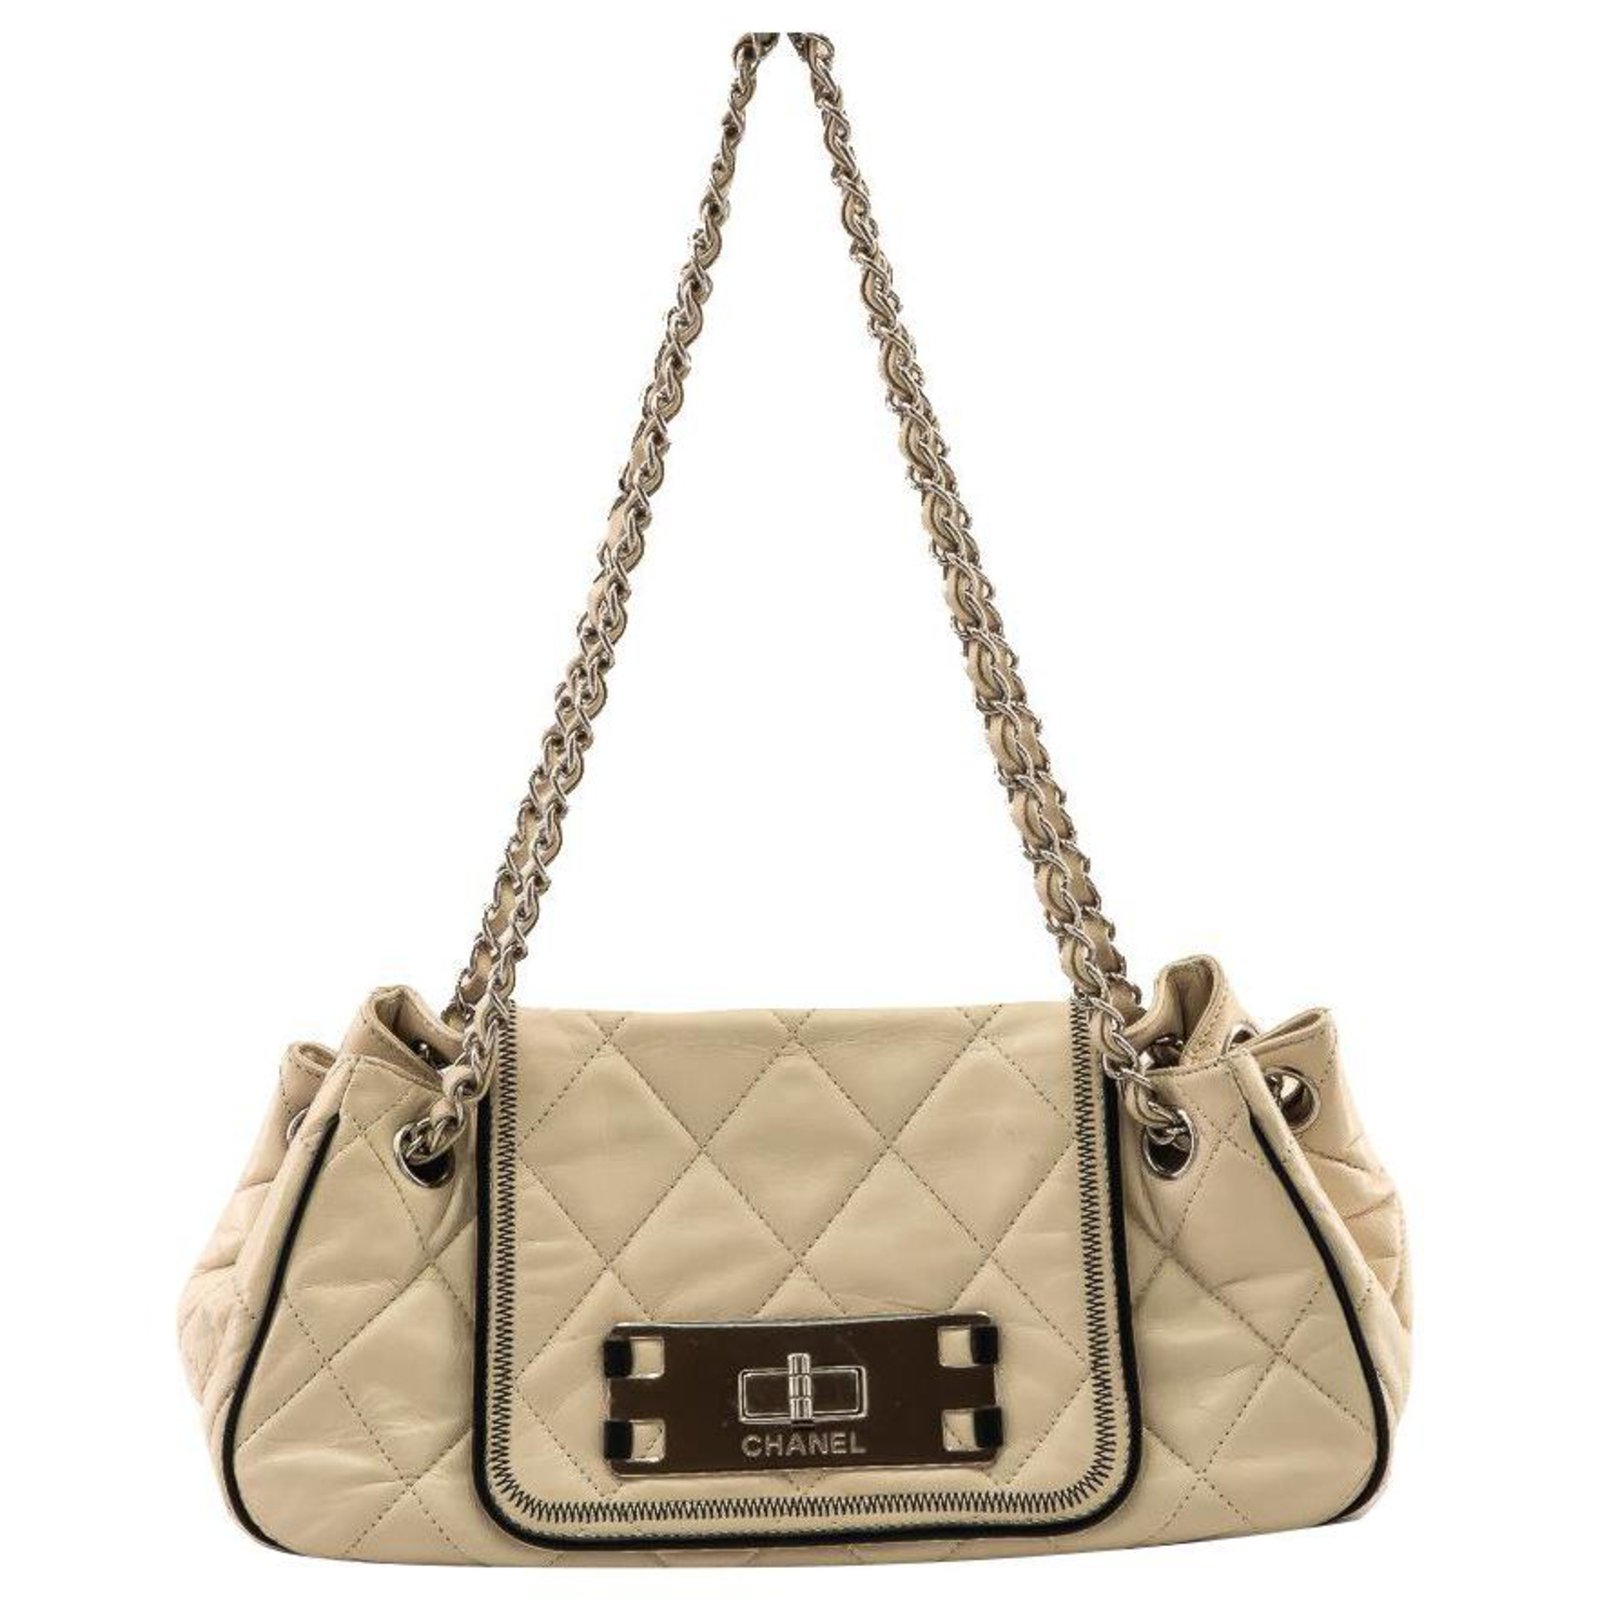 Chanel Beige Caviar Leather East West Small Classic Flap Bag